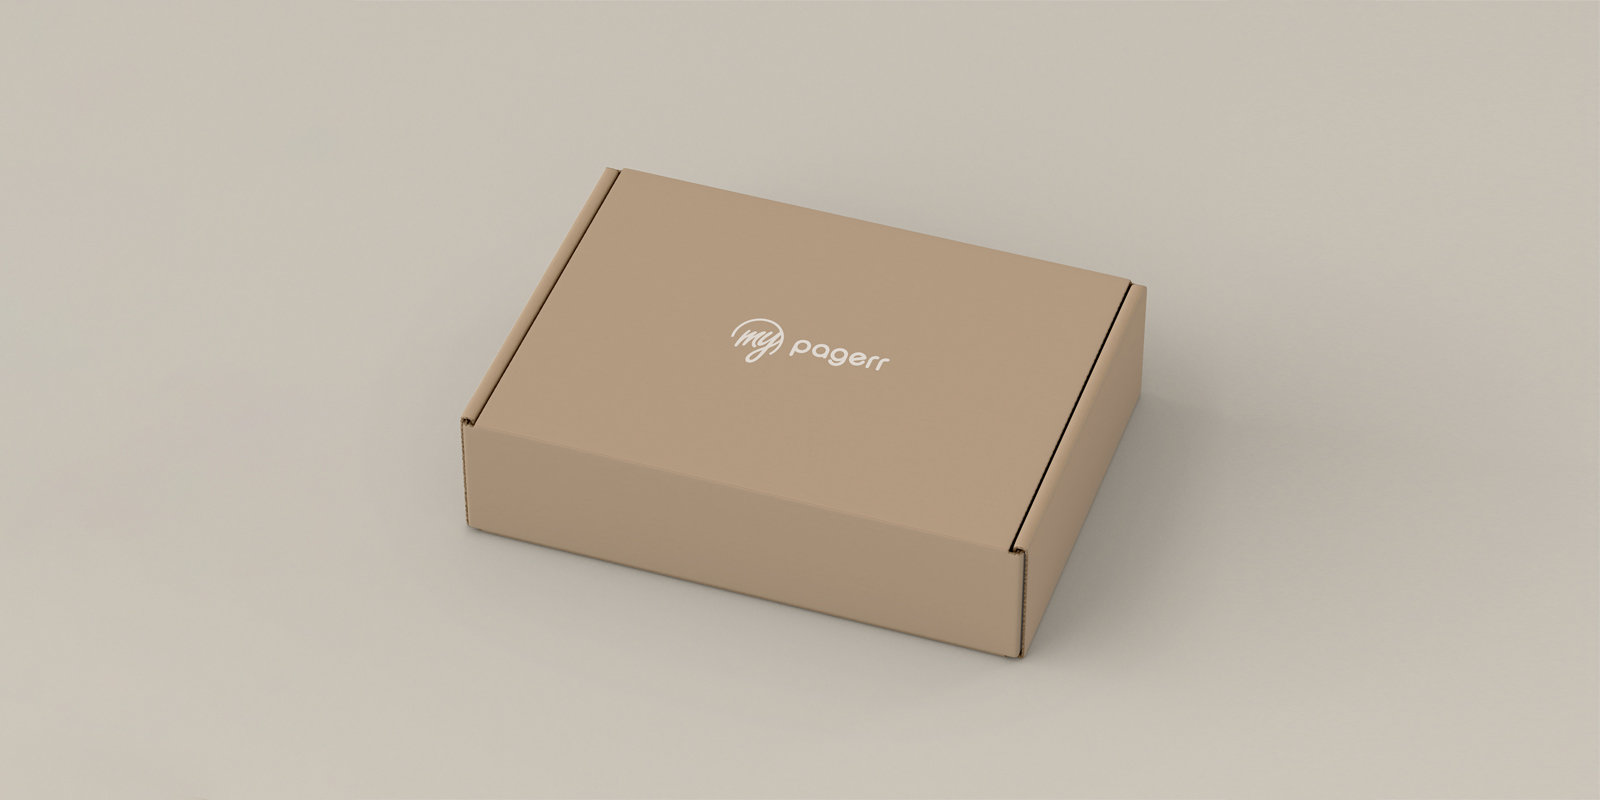 Bespoke boxes in Darwin - Print with Pagerr